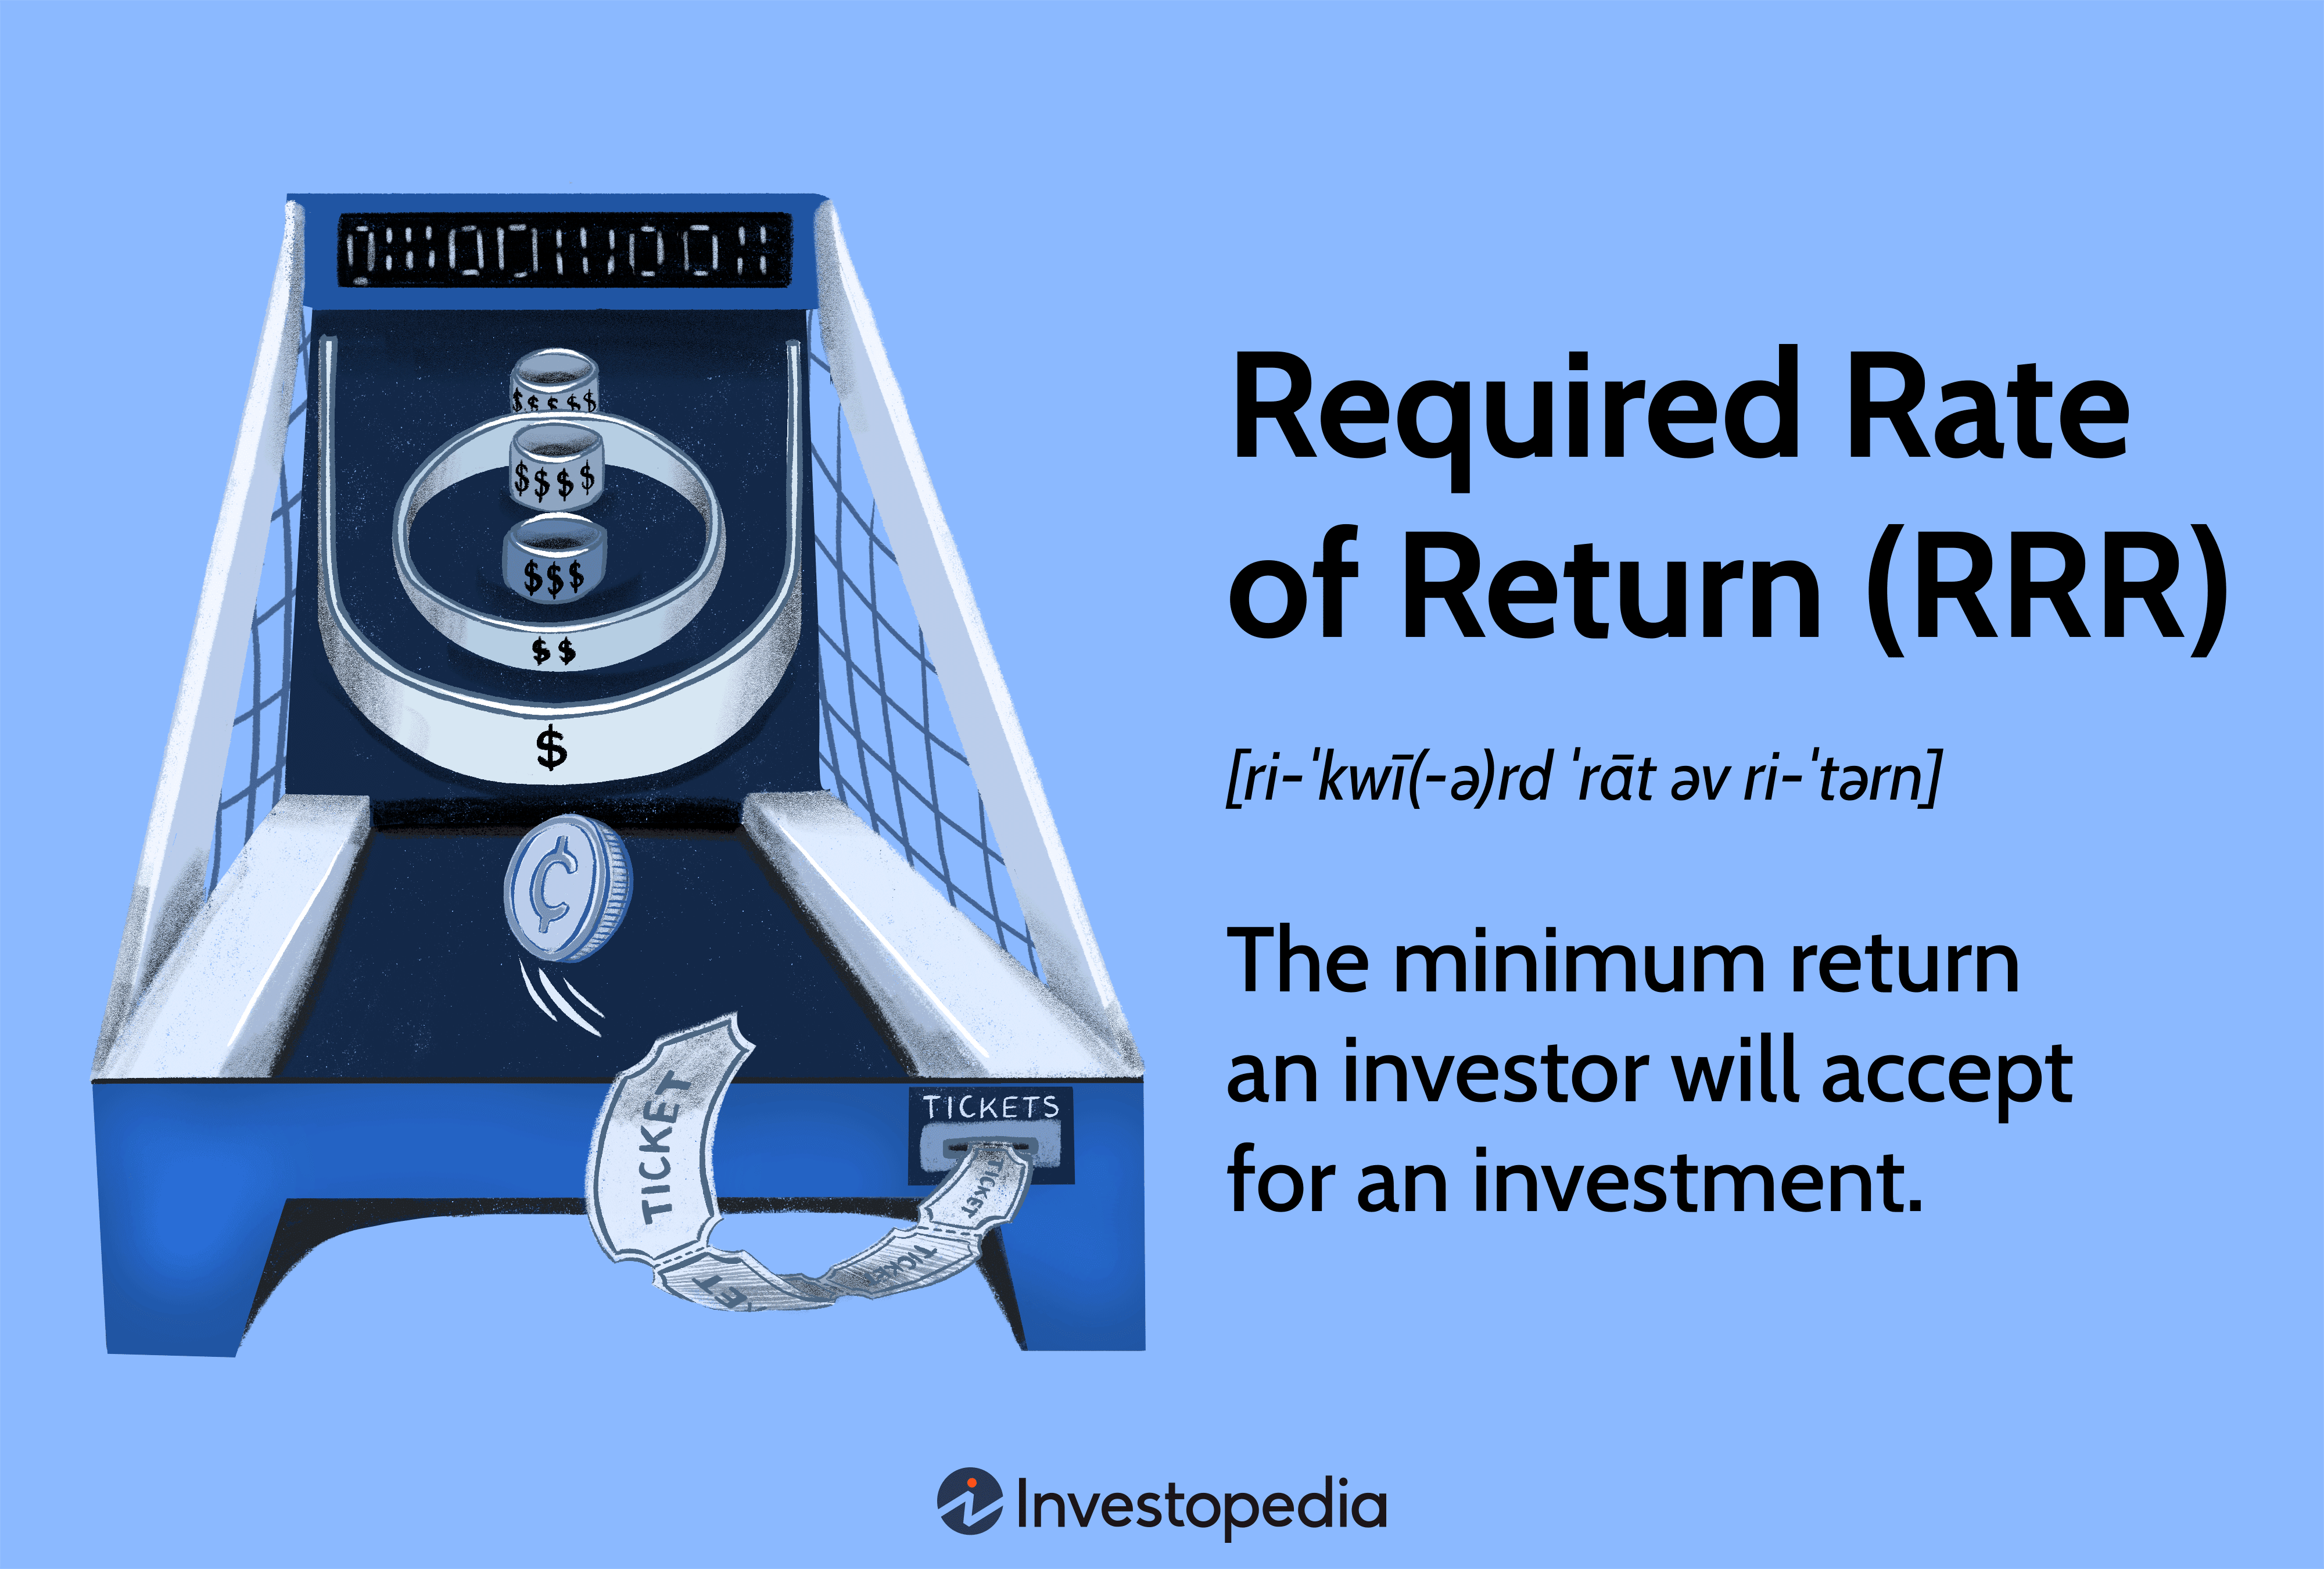 Required Rate of Return (RRR)